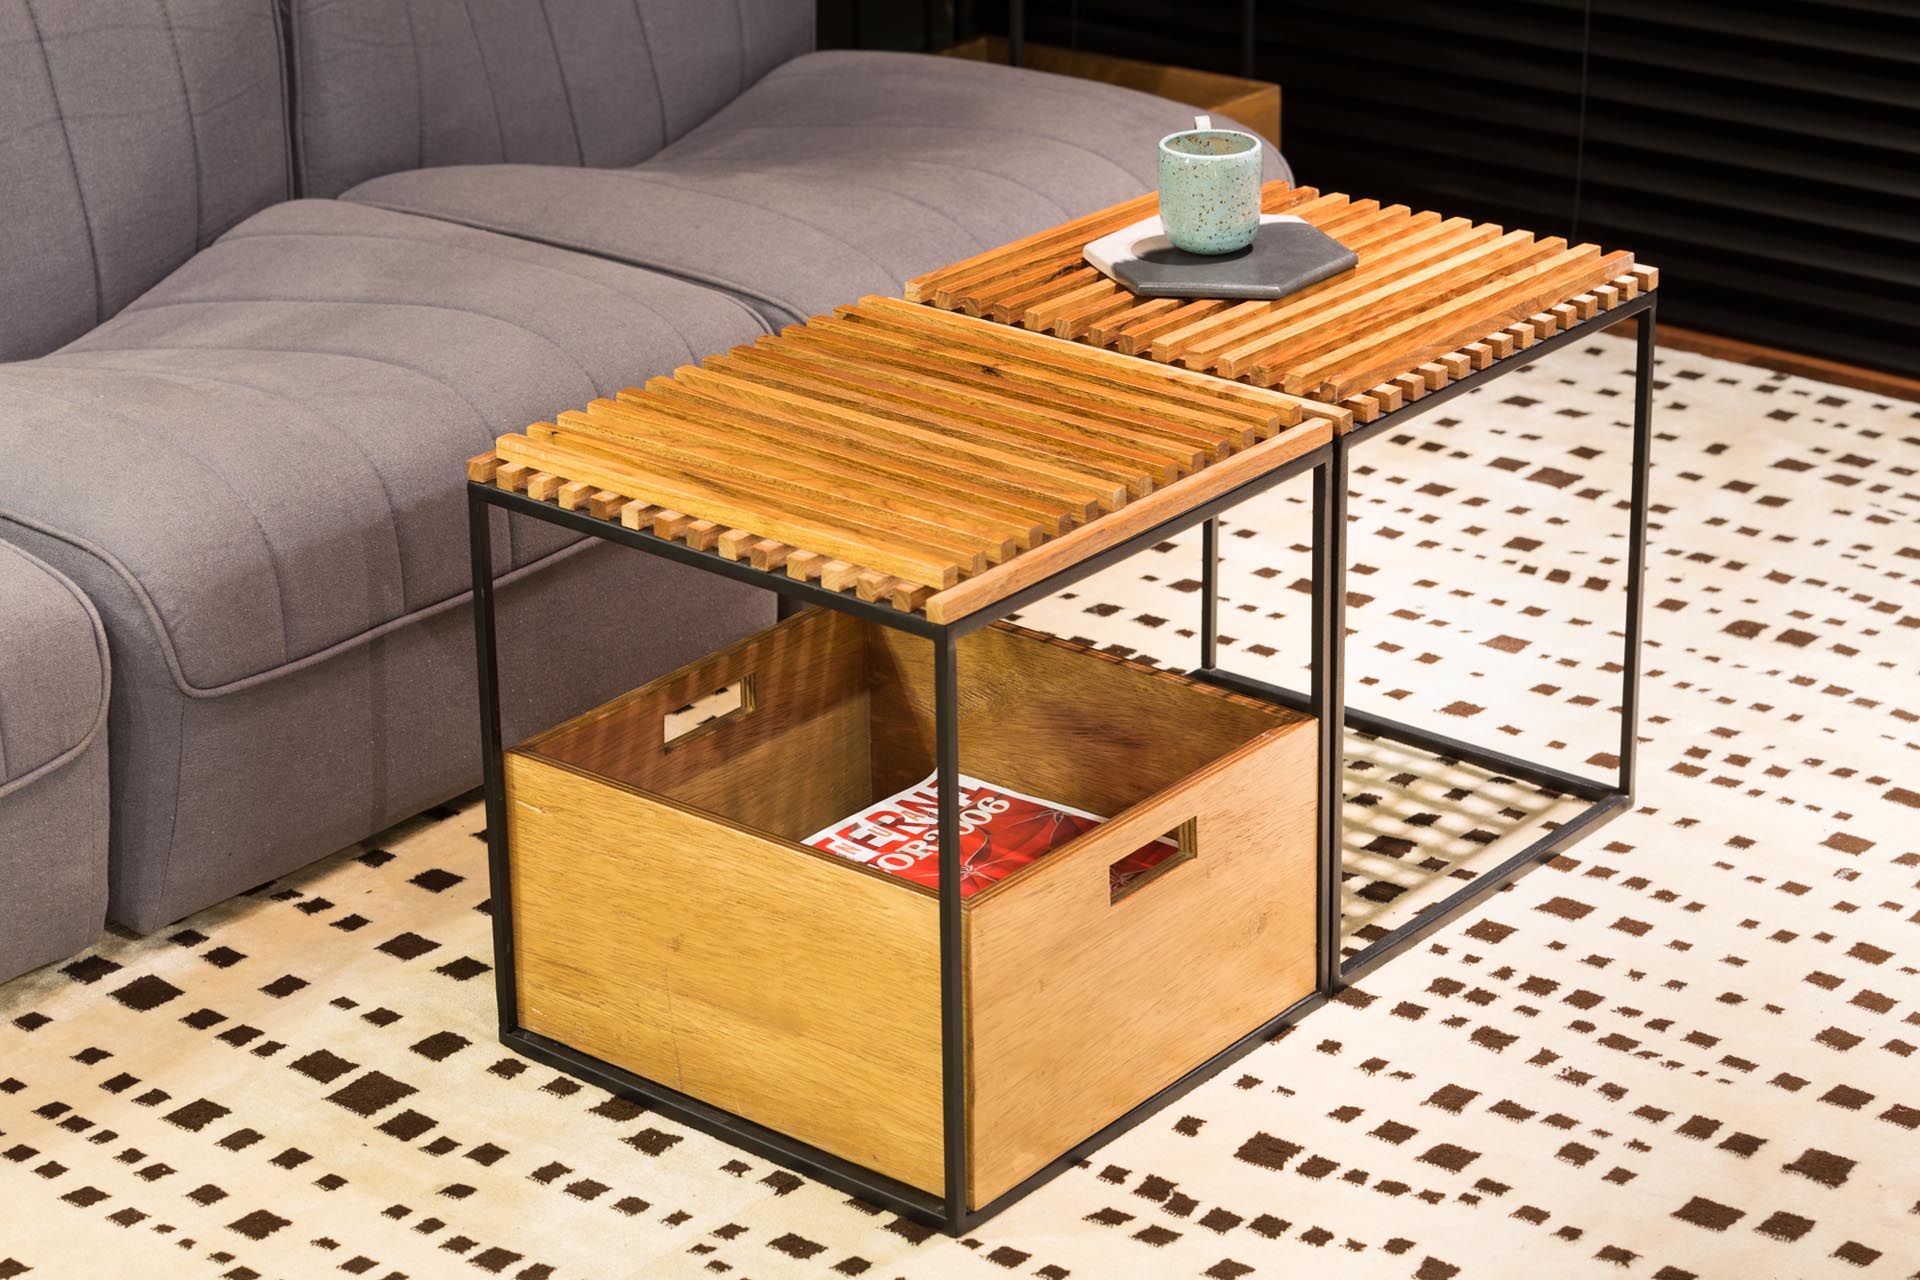 A modern coffee table that can be stacked as a bookshelf.